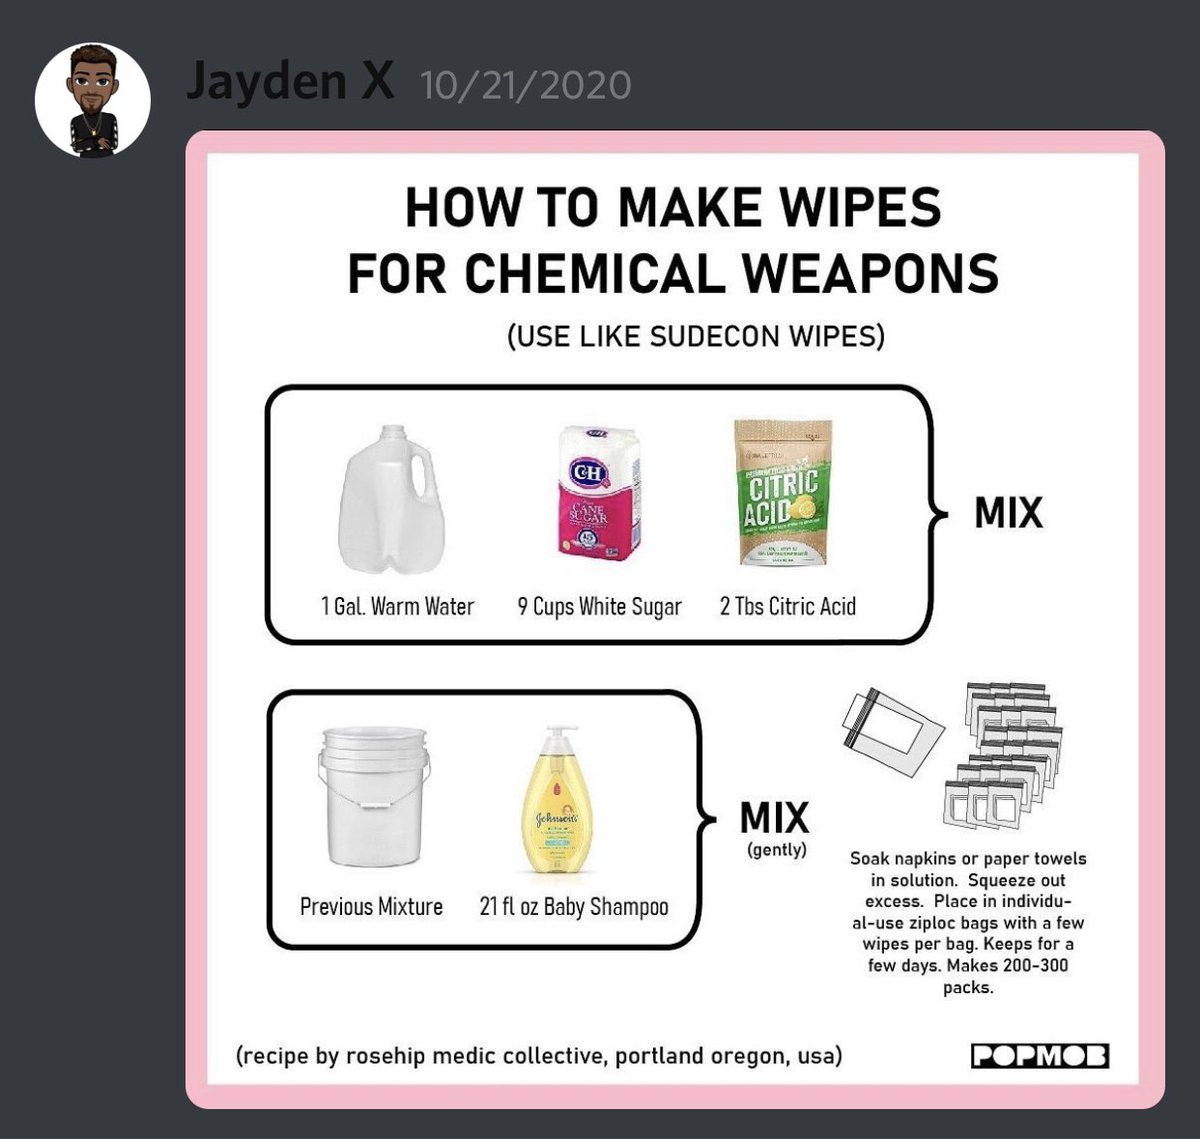 Sullivan posted in his discord server “How to make wipes for chemical weapons”